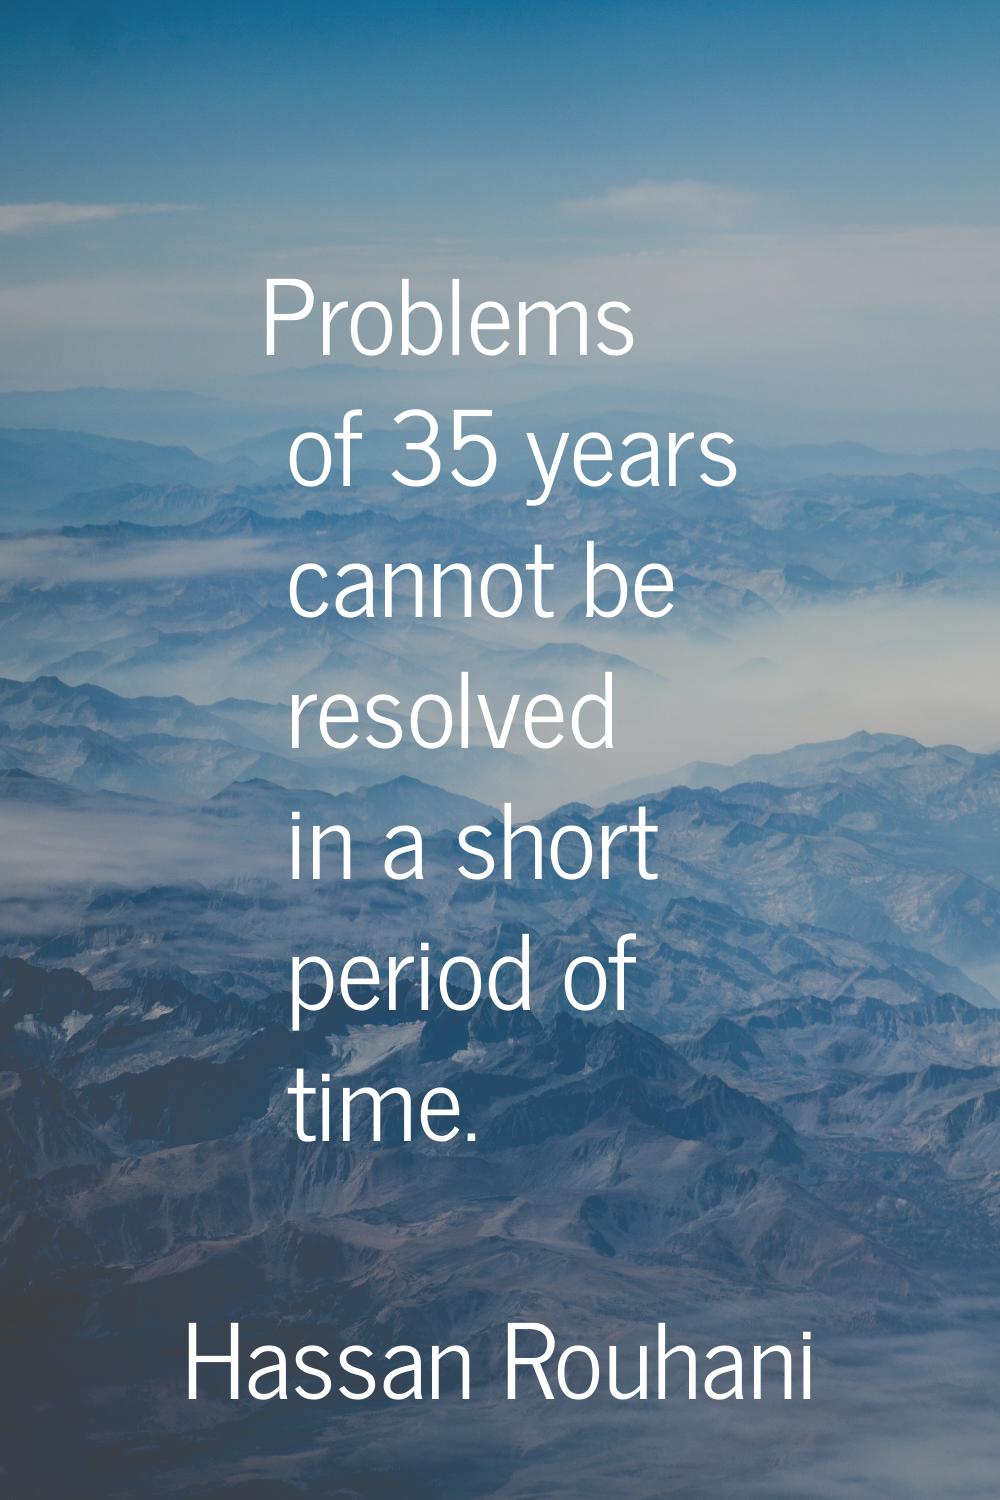 Problems of 35 years cannot be resolved in a short period of time.